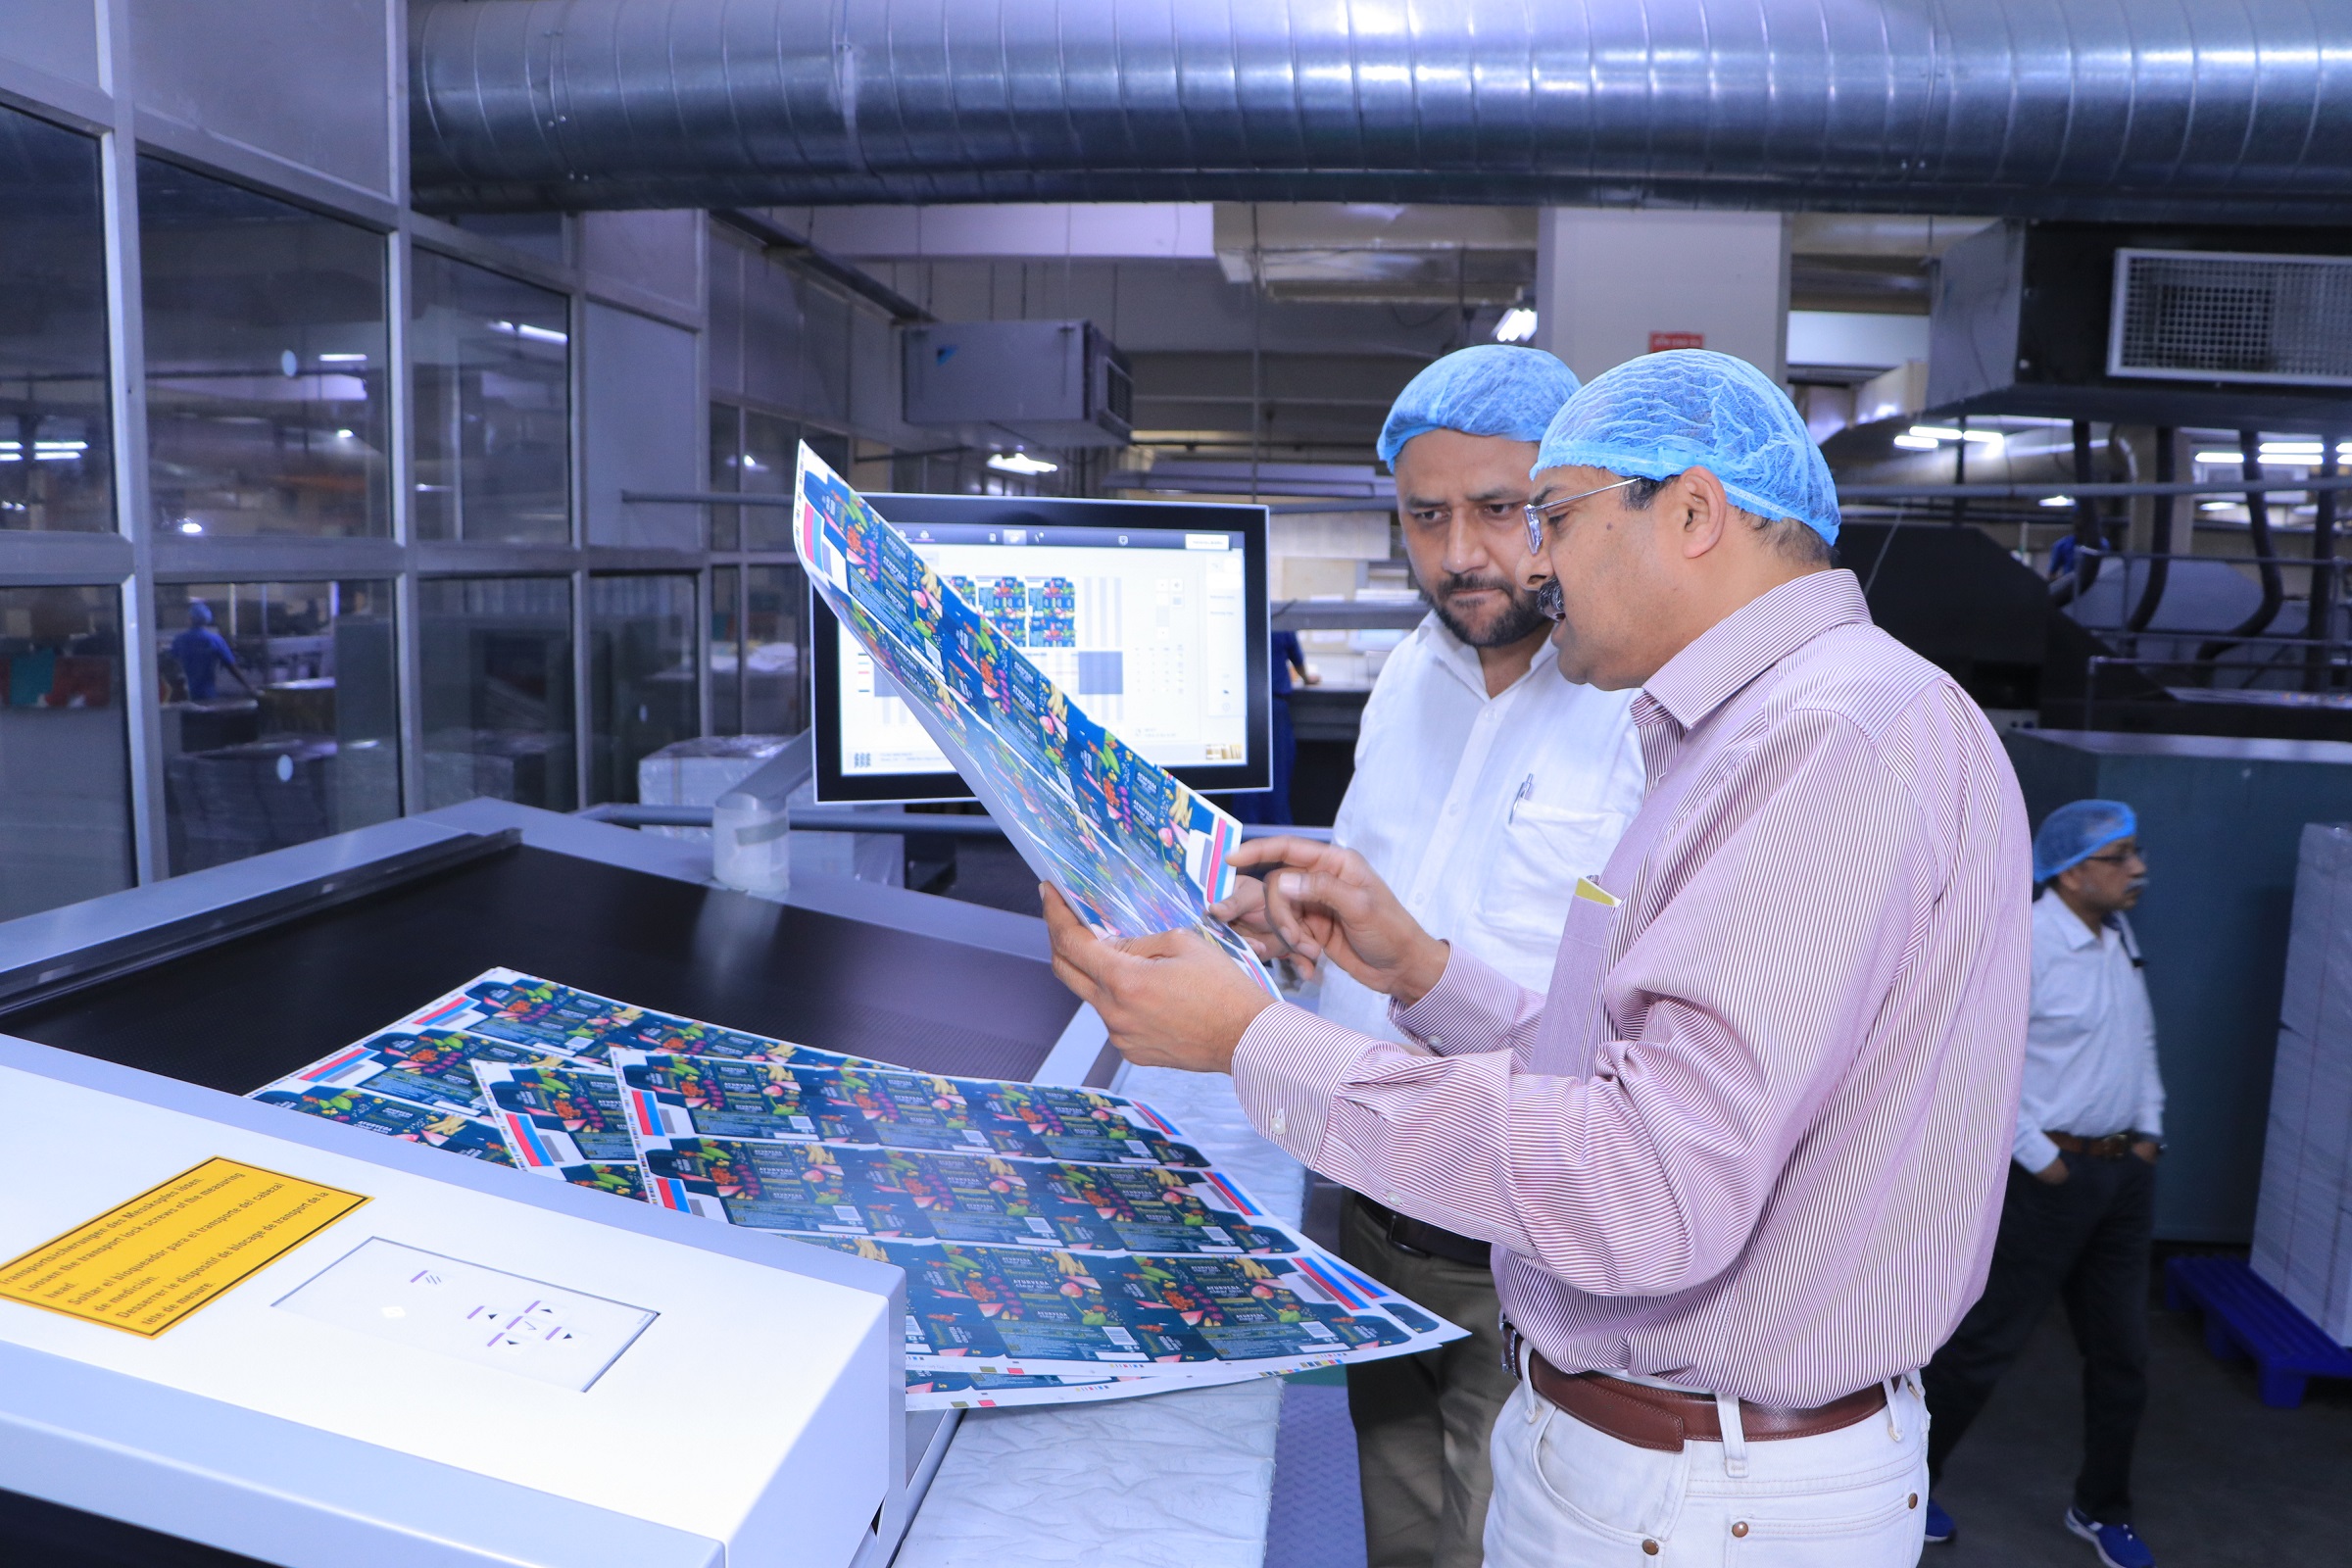 (In Picture): Mr. Sandeep Bhargava, inspecting a printed sheet on the Prinect Image Control station